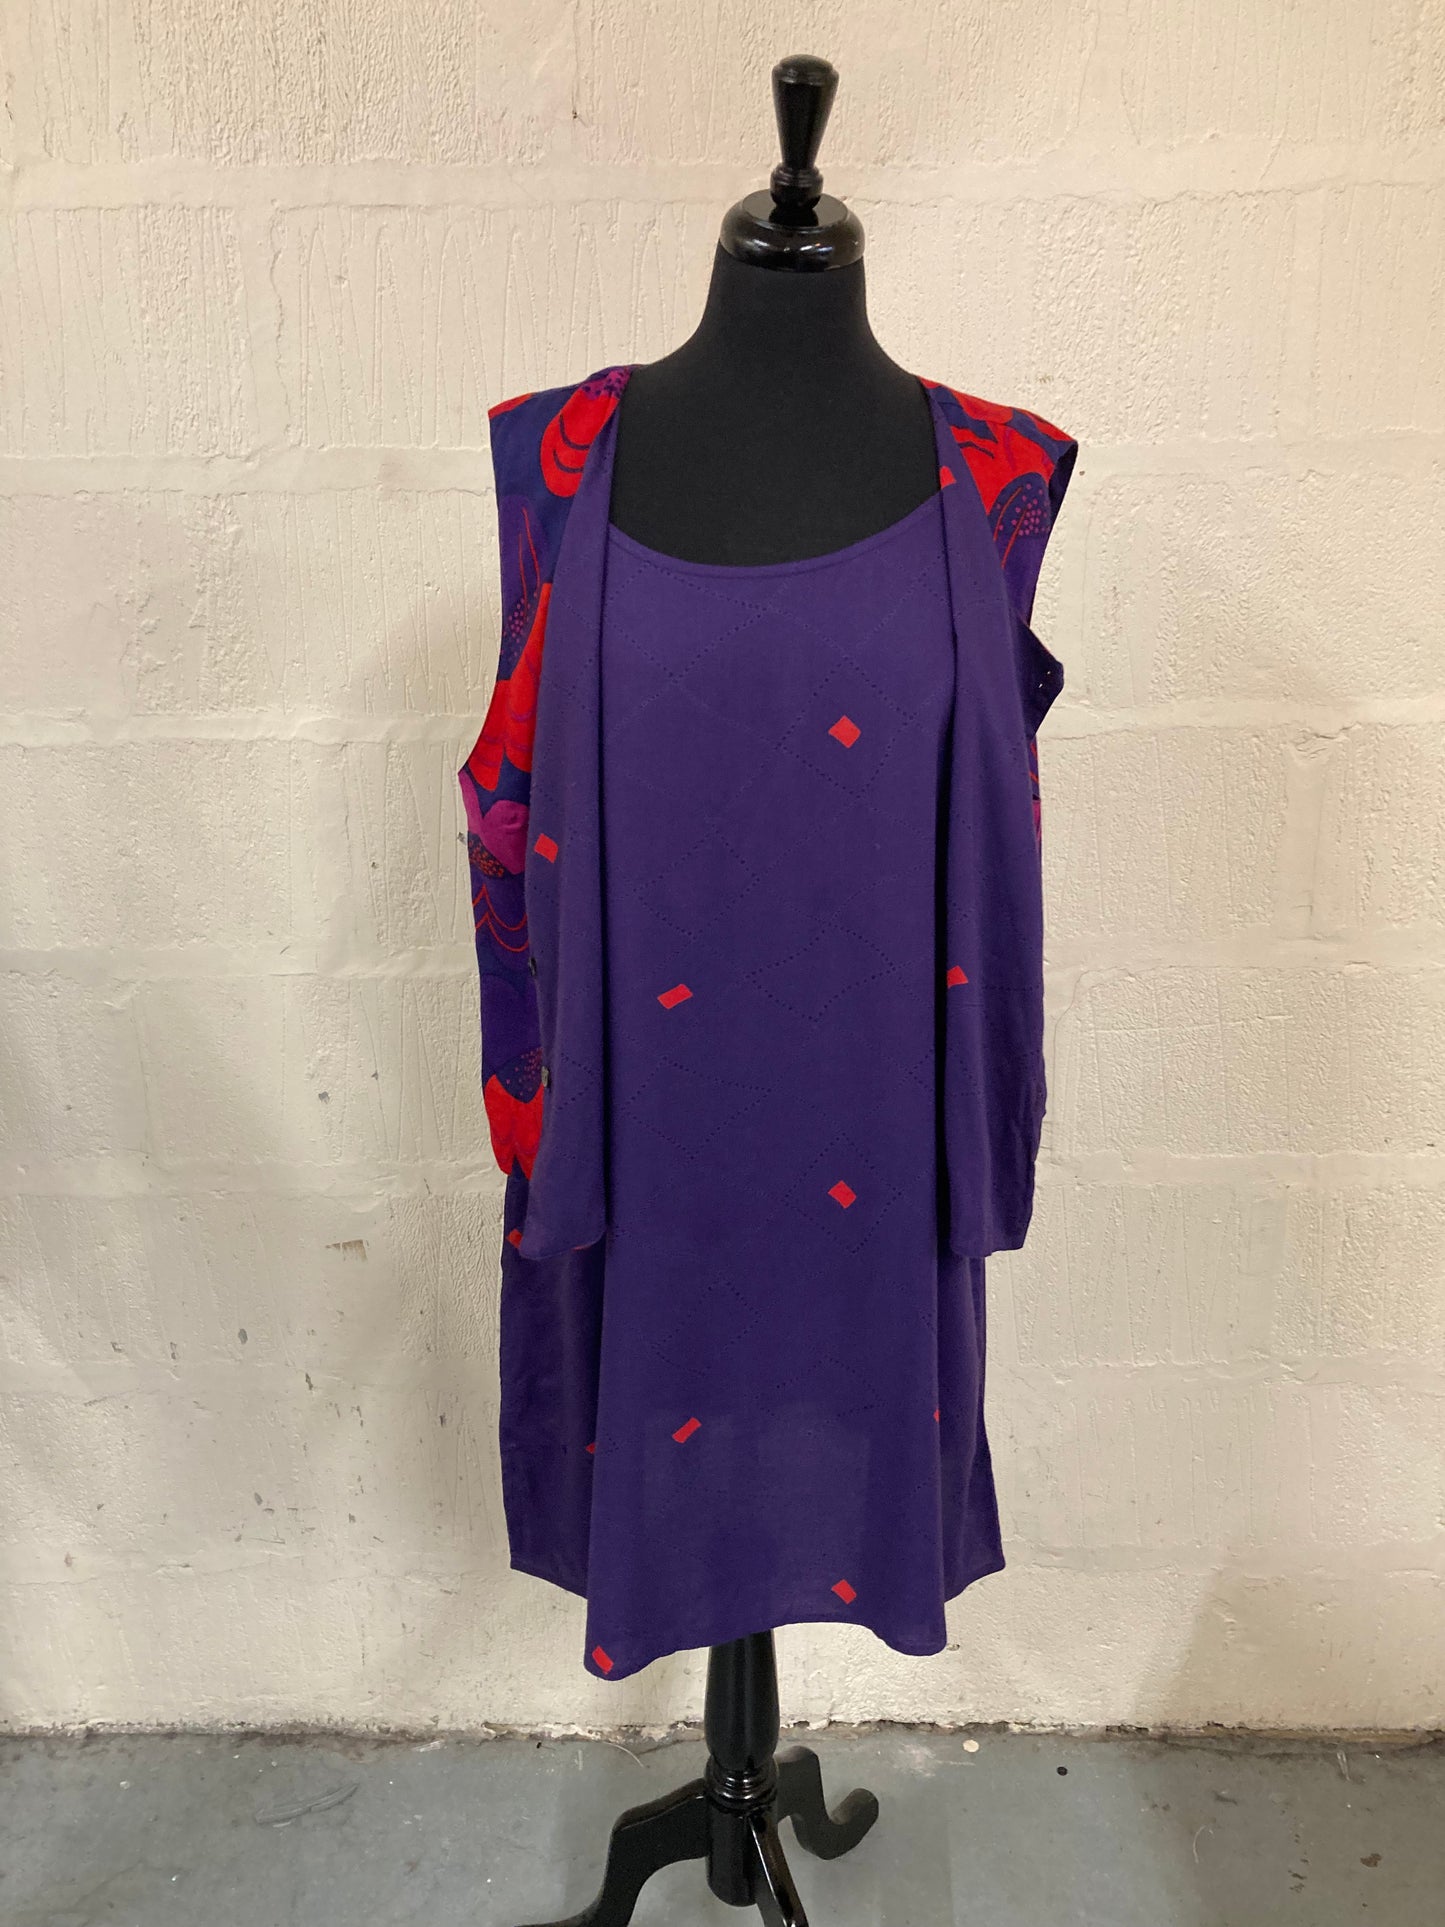 BNWT Purple and Red Reversible Waistcoat Size 18